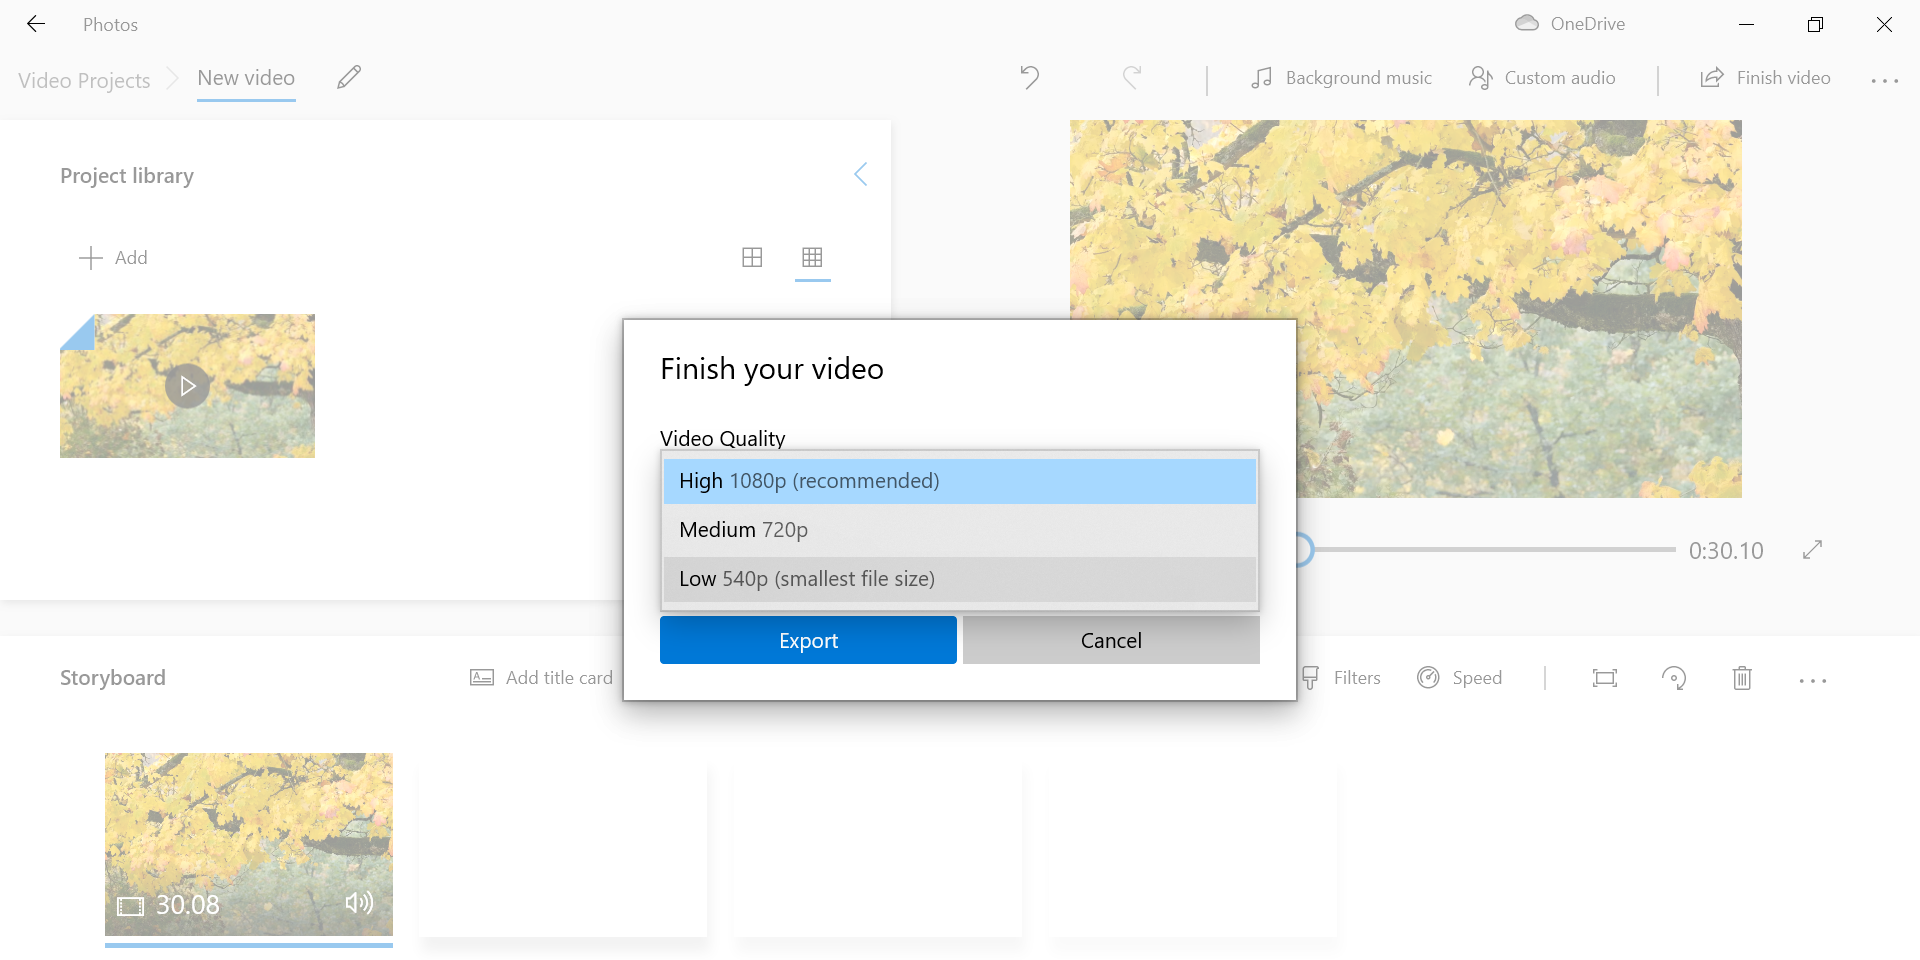 Reduce video size with the built-in Video editor